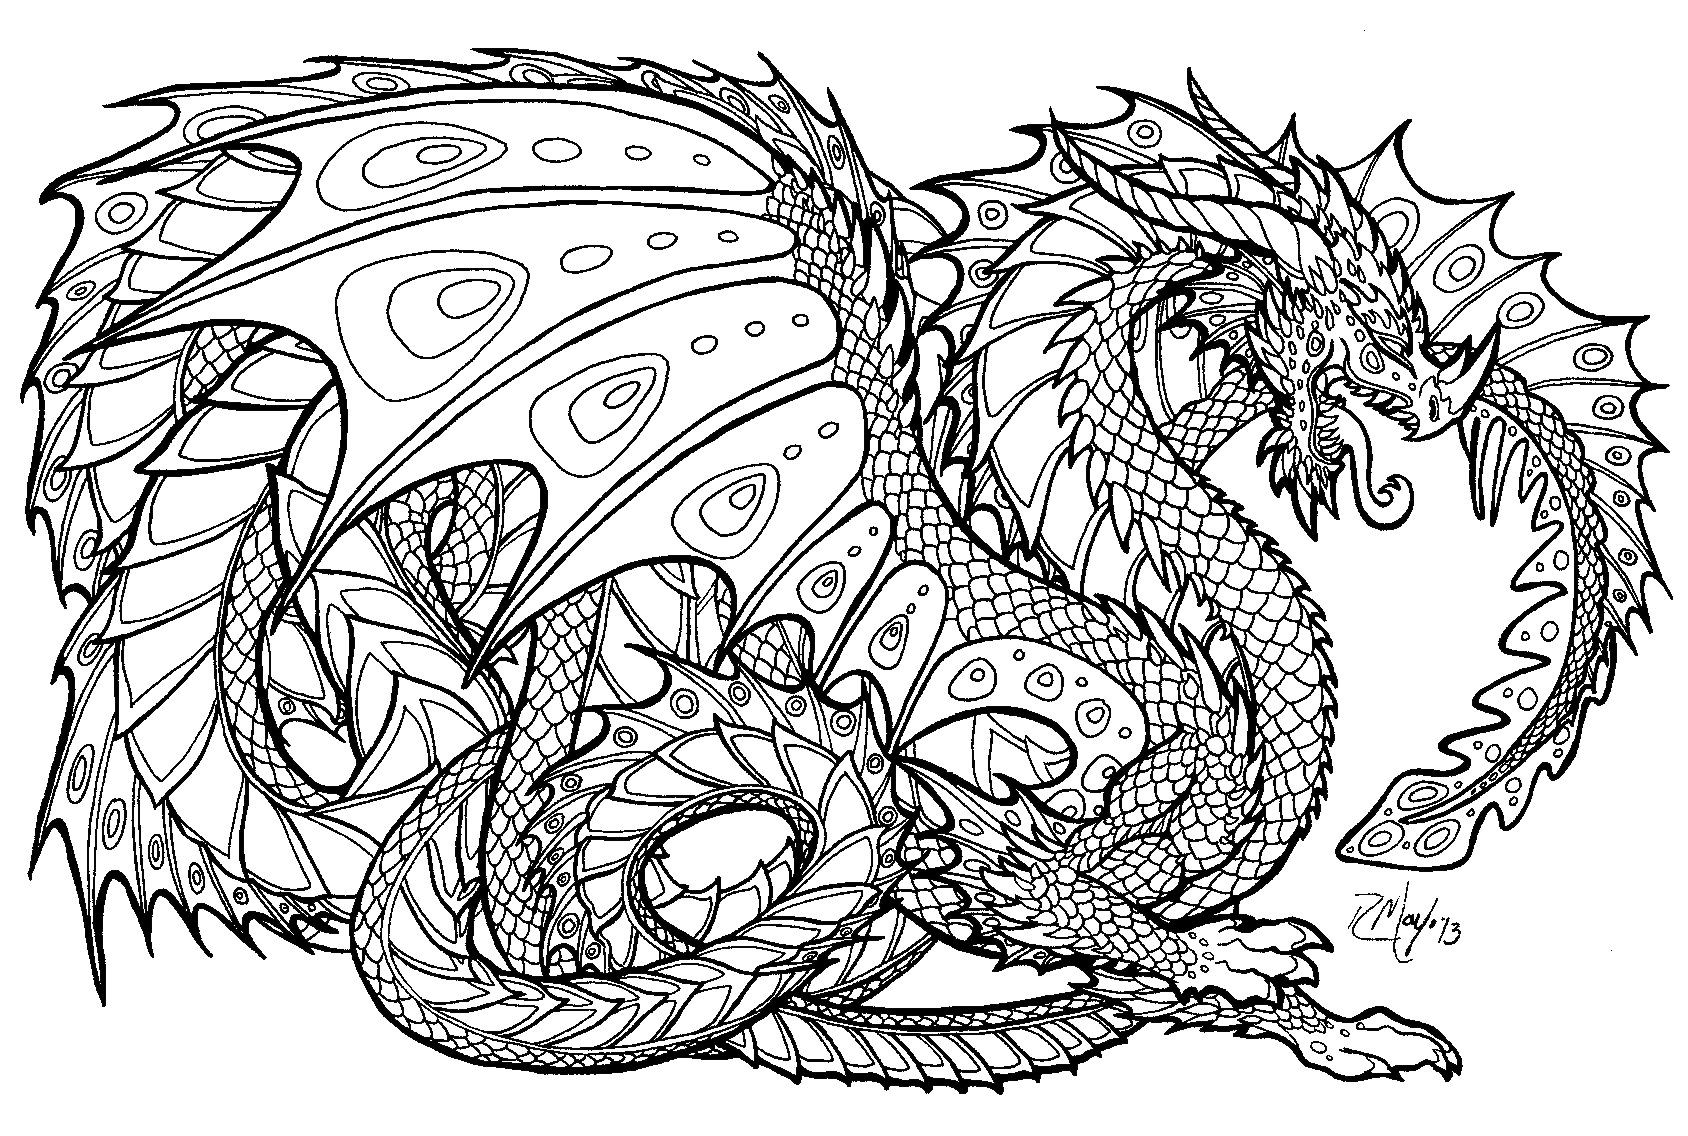 Dragon Coloring Pages Free Printable
 free printable coloring pages for adults advanced dragons